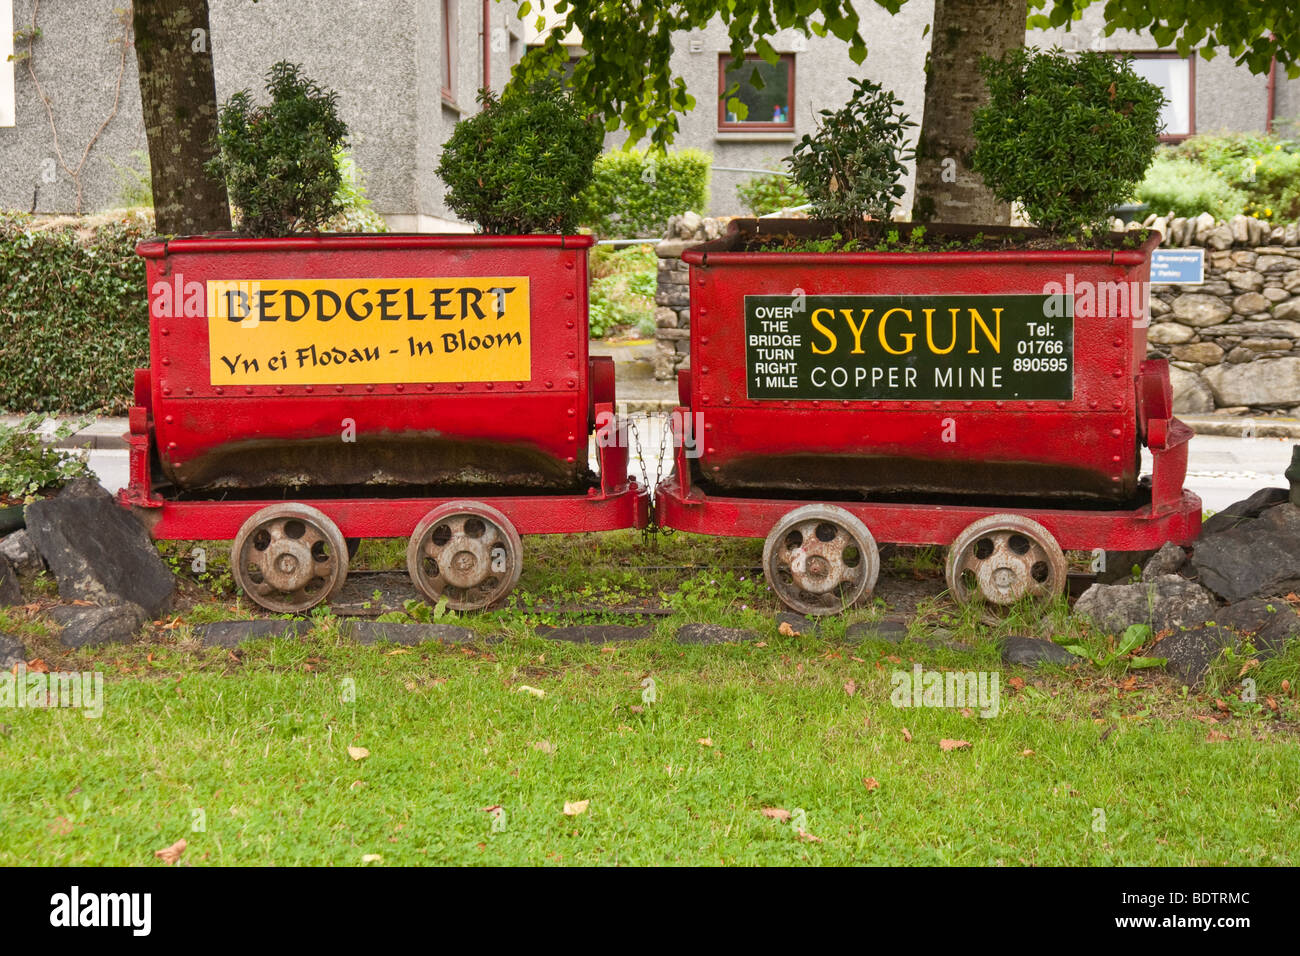 advertisement for Sygun 'copper mine' on some old carriages Stock Photo